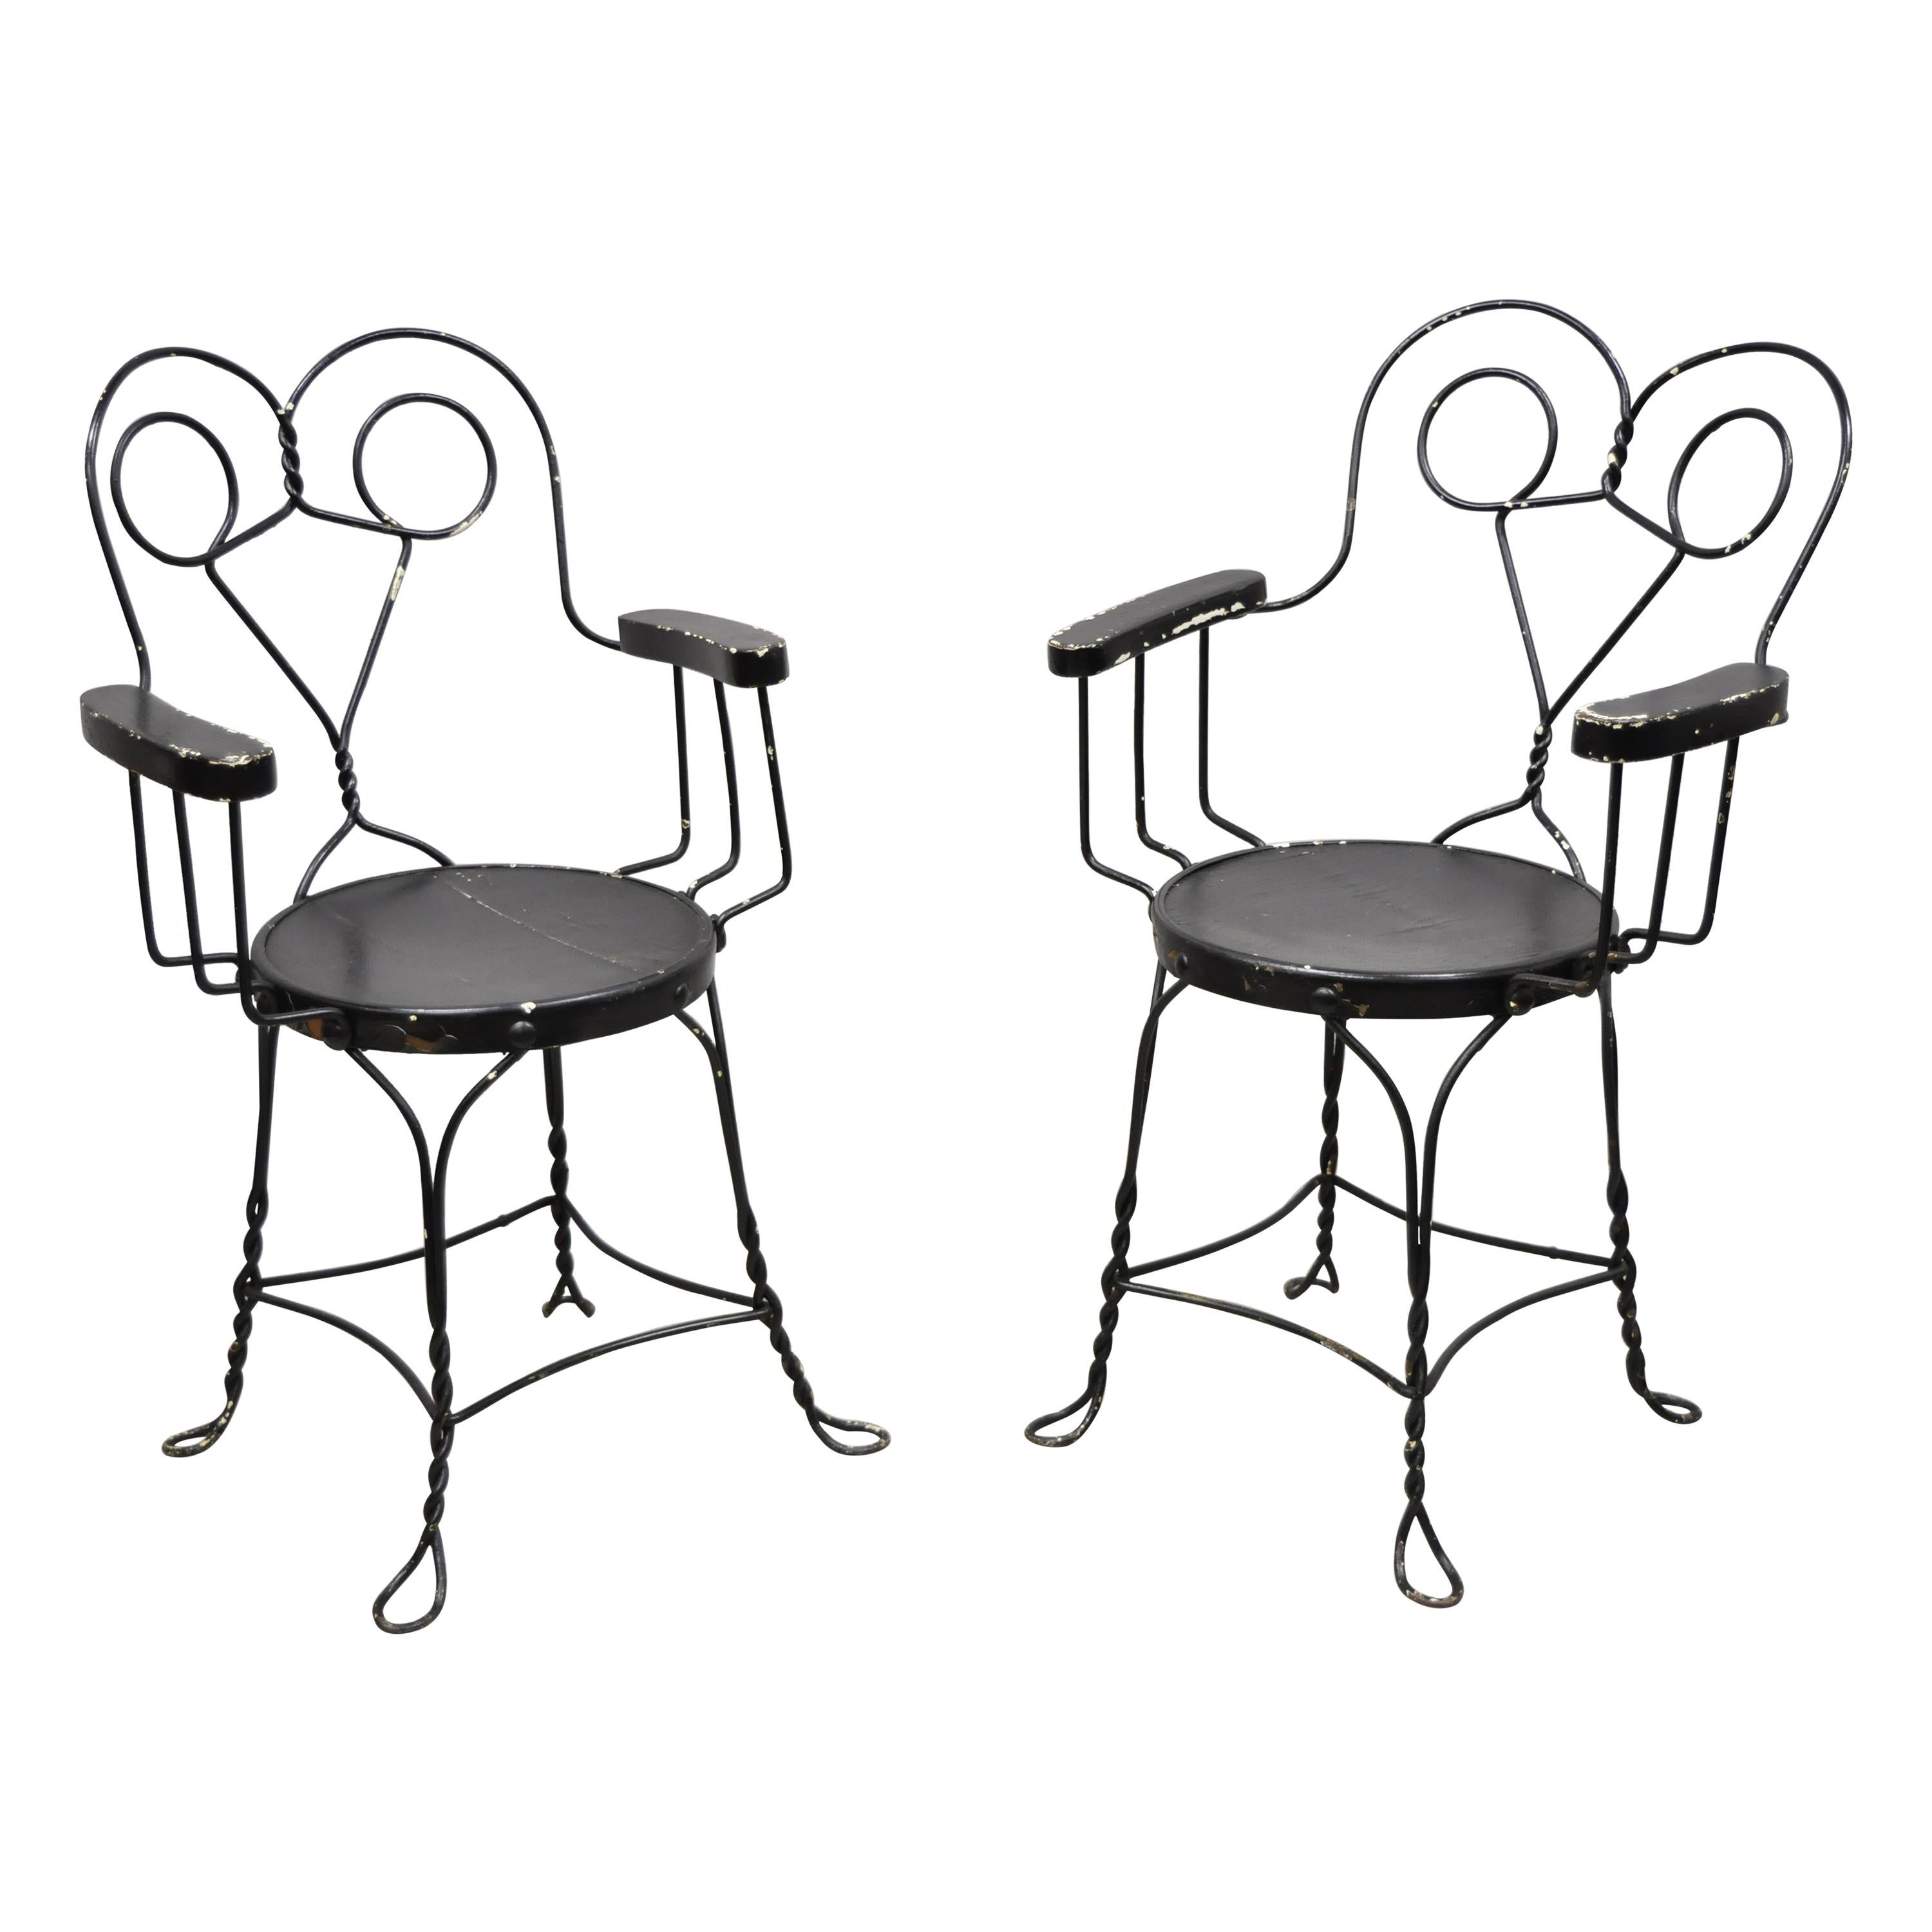 Antique Wrought Iron Twisted Metal Ice Cream Parlor Arm Chairs Wood Arms, Pair For Sale